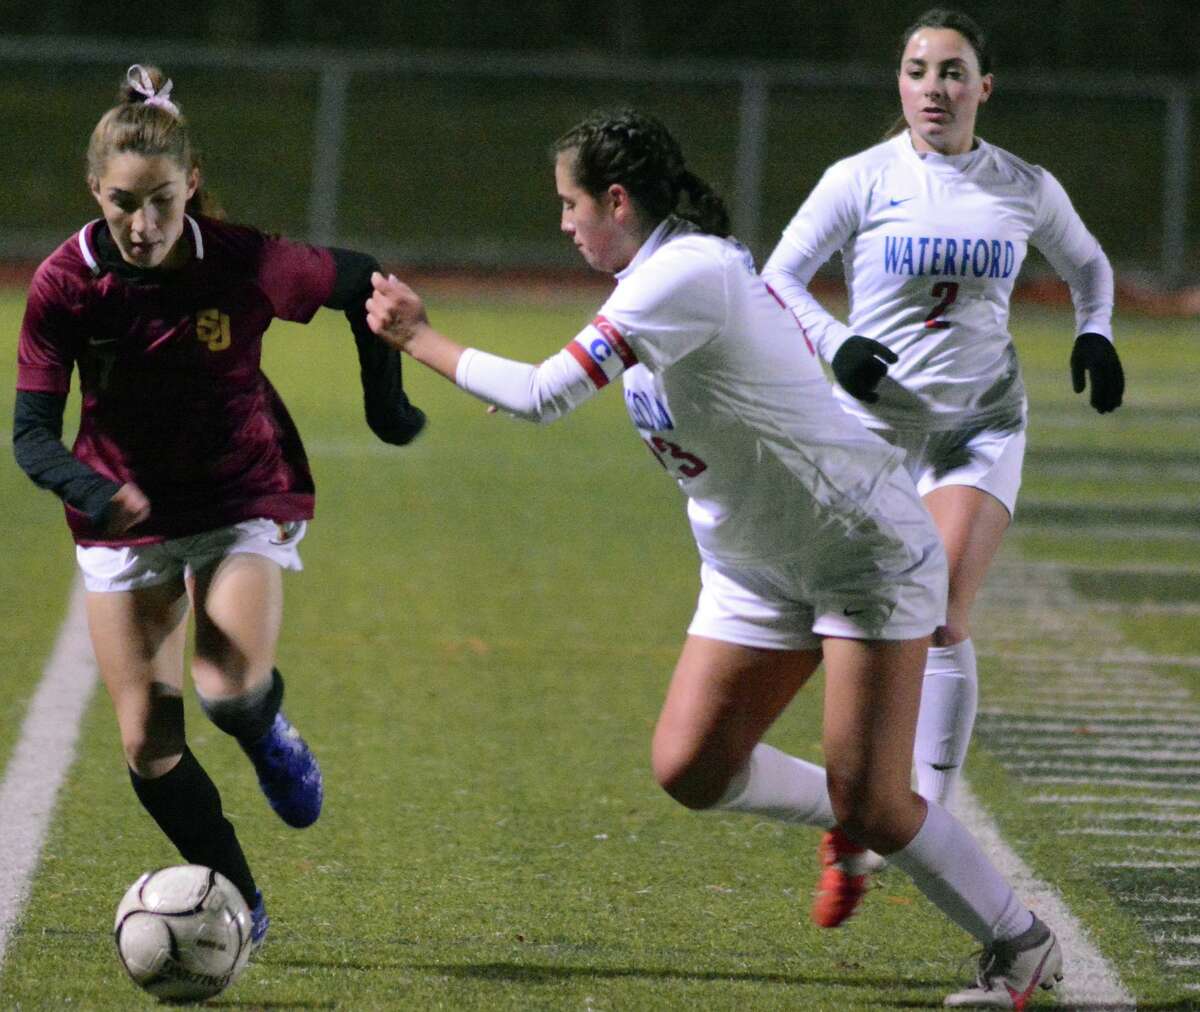 St. Joseph's Sara Parker dribbles the ball downfield during the CIAC Class L girls' soccer semifinals Tuesday night at Strong Stadium in West Haven. Waterfird's Lily Marelli defends.